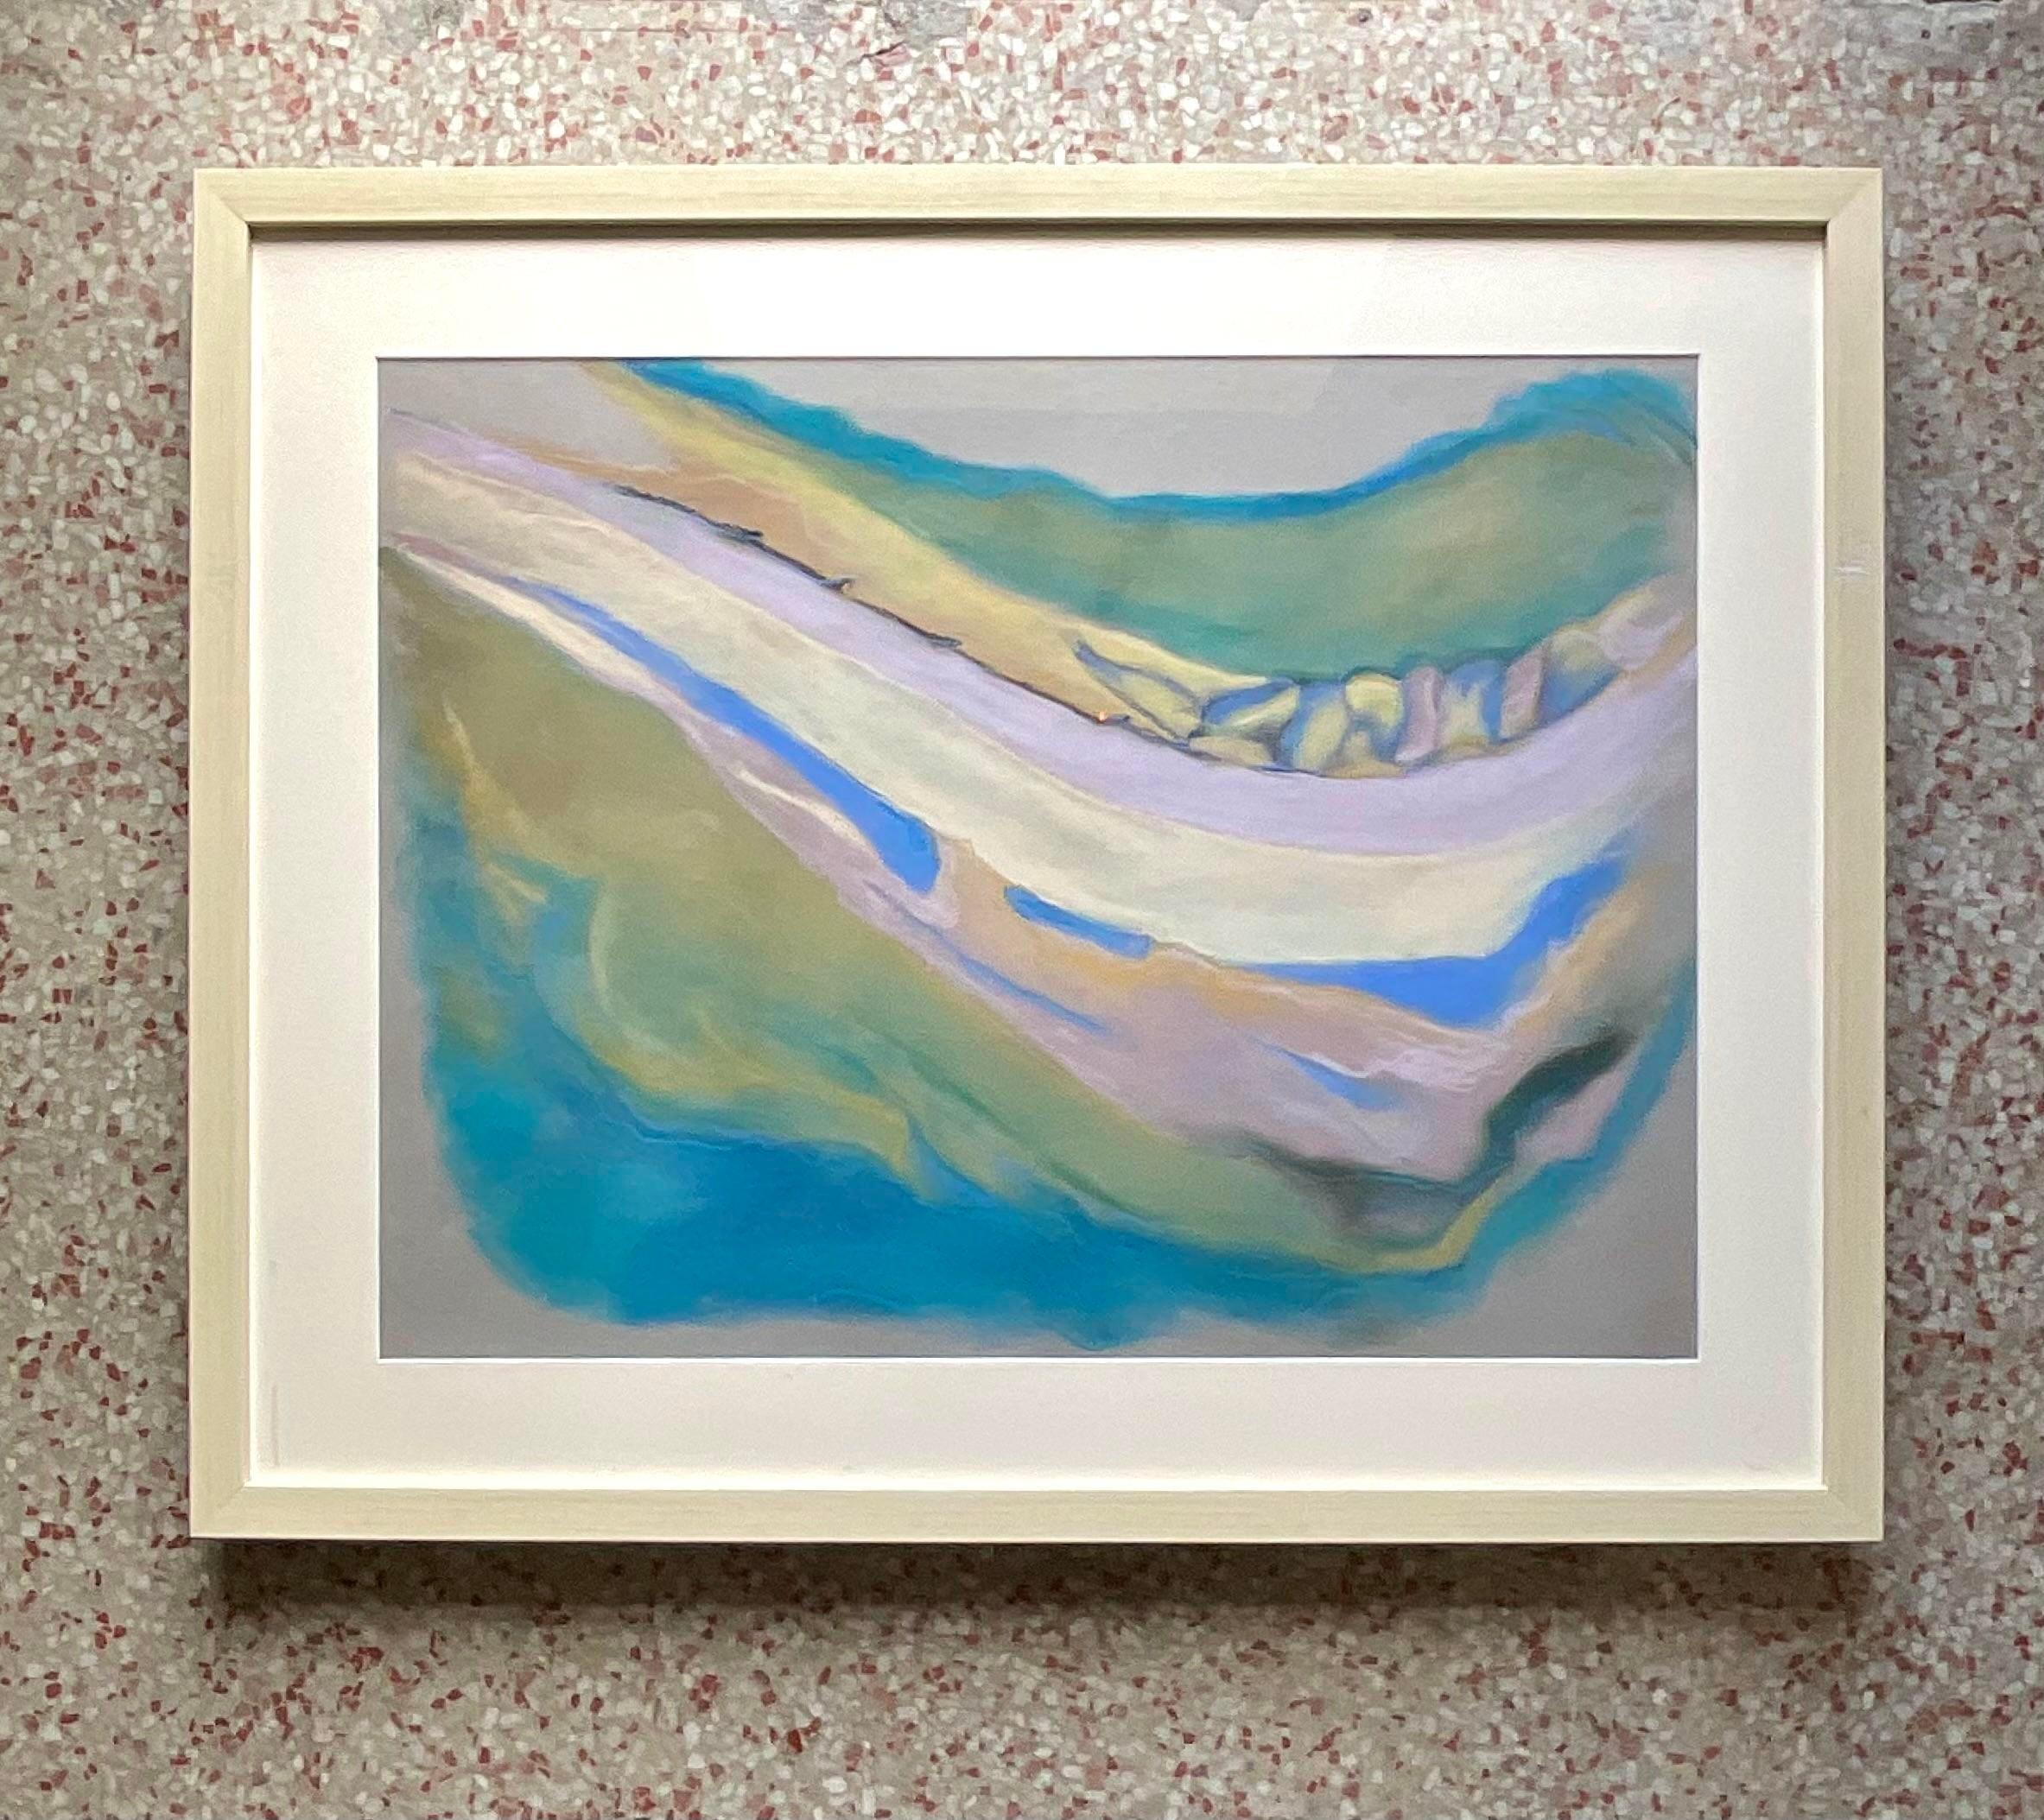 fabulous vintage 1980s original pastel painting on paper. A brilliant Abstract composition in soft muted colors. Signed by the artist. Acquired from a Palm Beach estate.